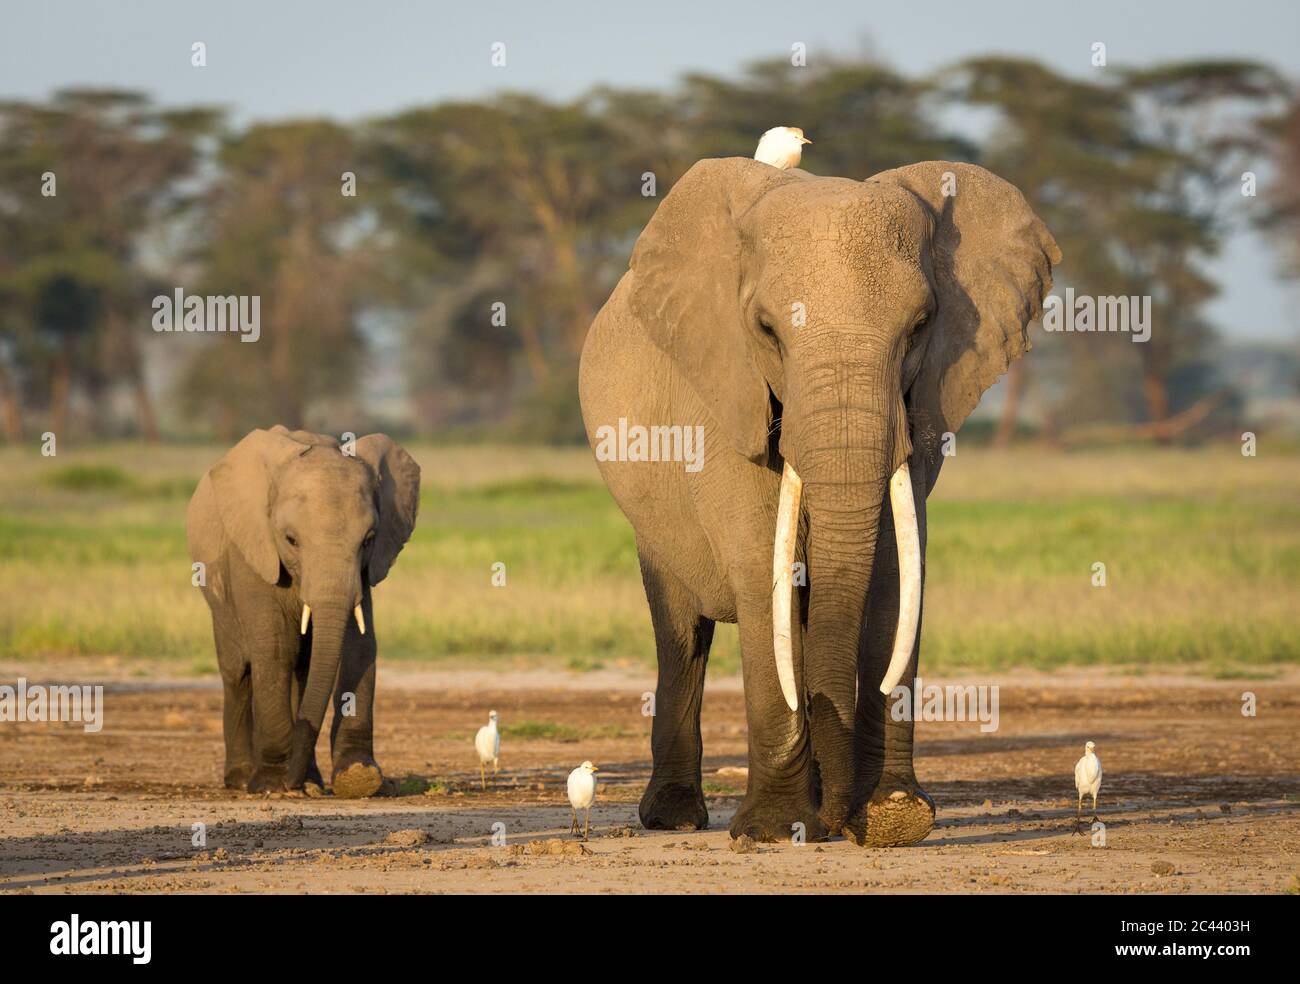 Adult female elephant with big tusks and an egret on her head being followed by a baby elephant in Amboseli National Park Kenya Stock Photo